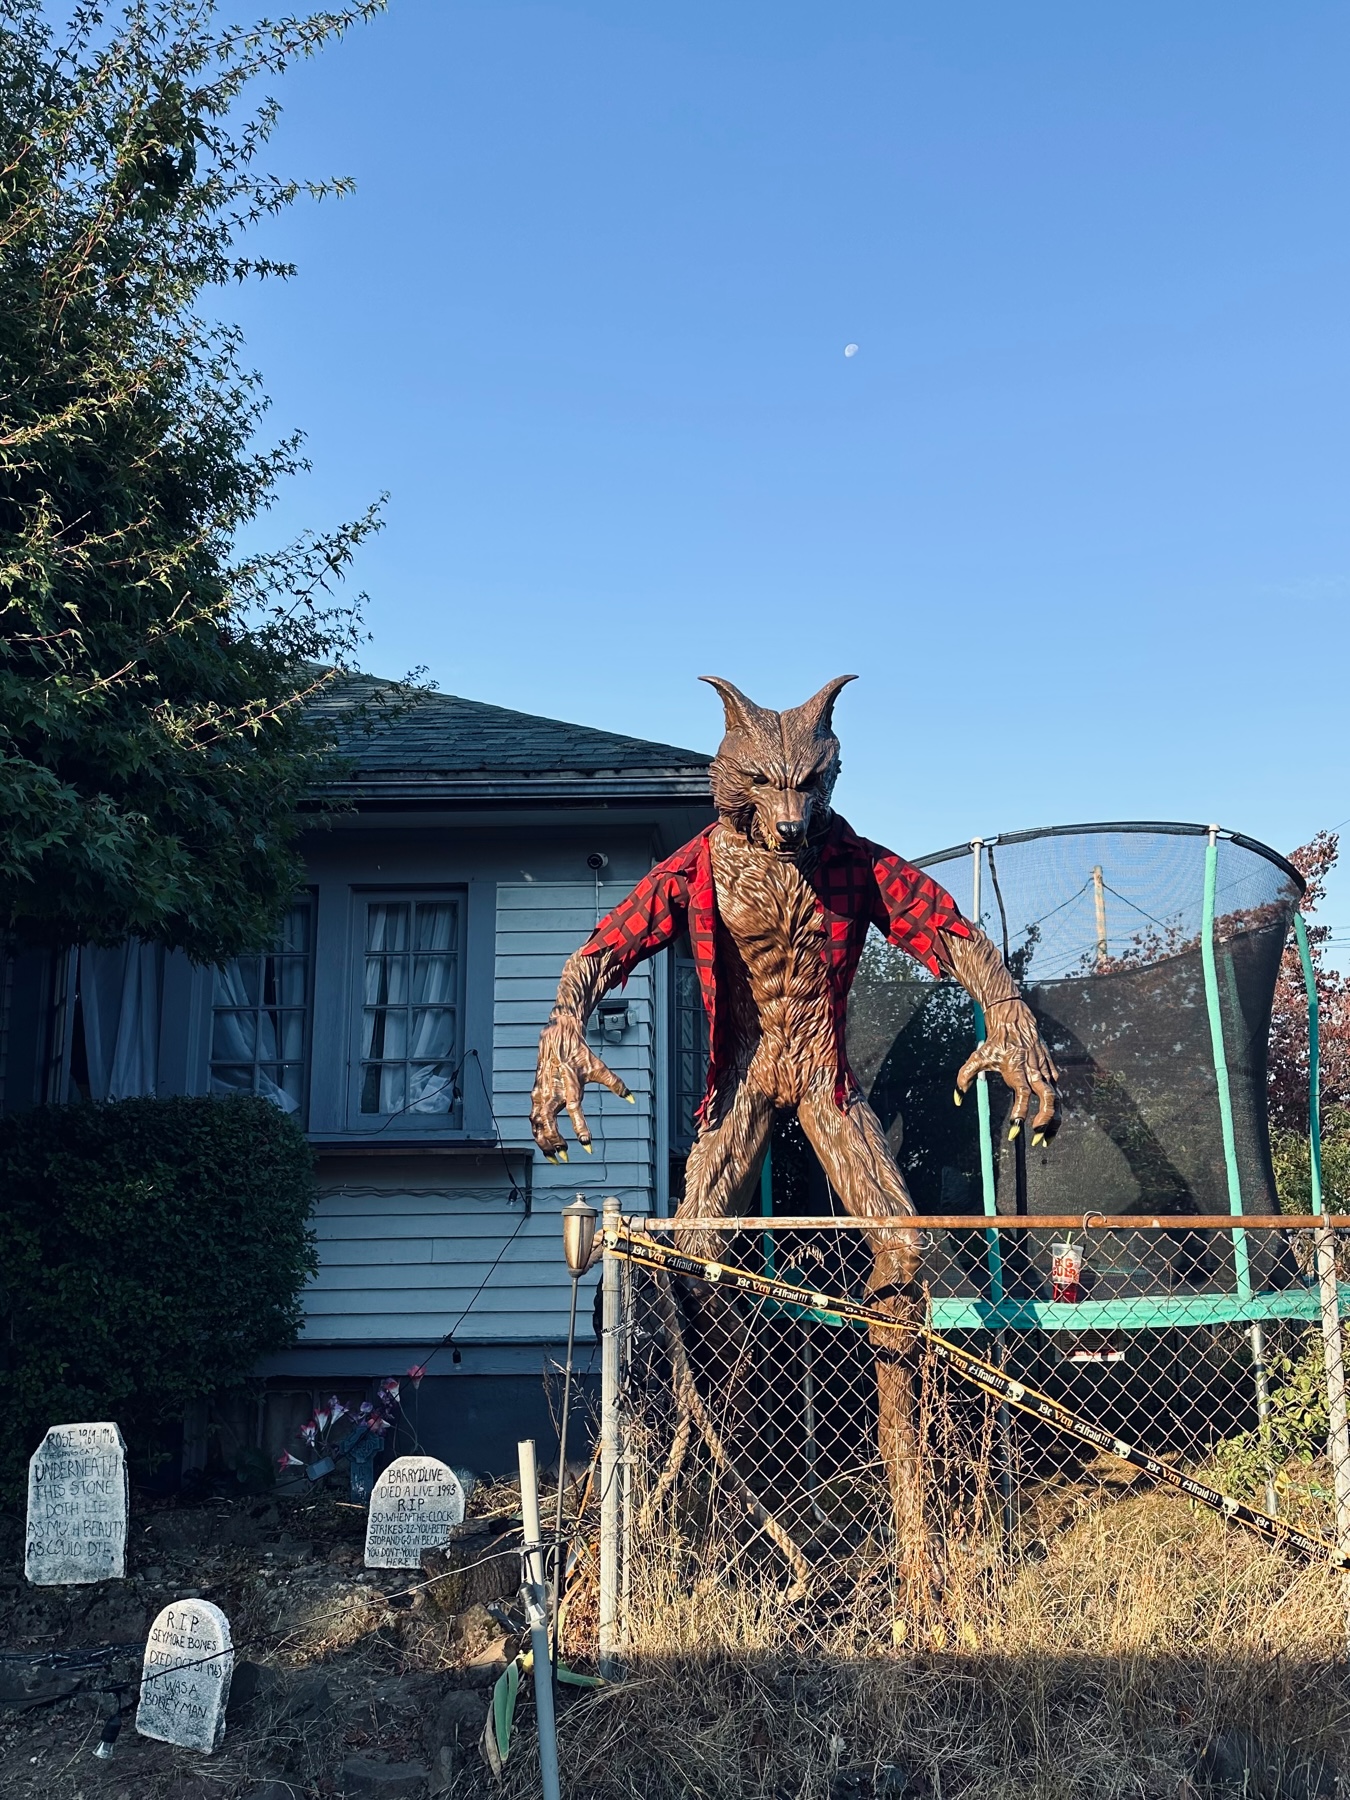 A tall werewolf decoration in a yard that reaches to the roofline of the house behind it, with a mostly full moon in the morning sky behind.